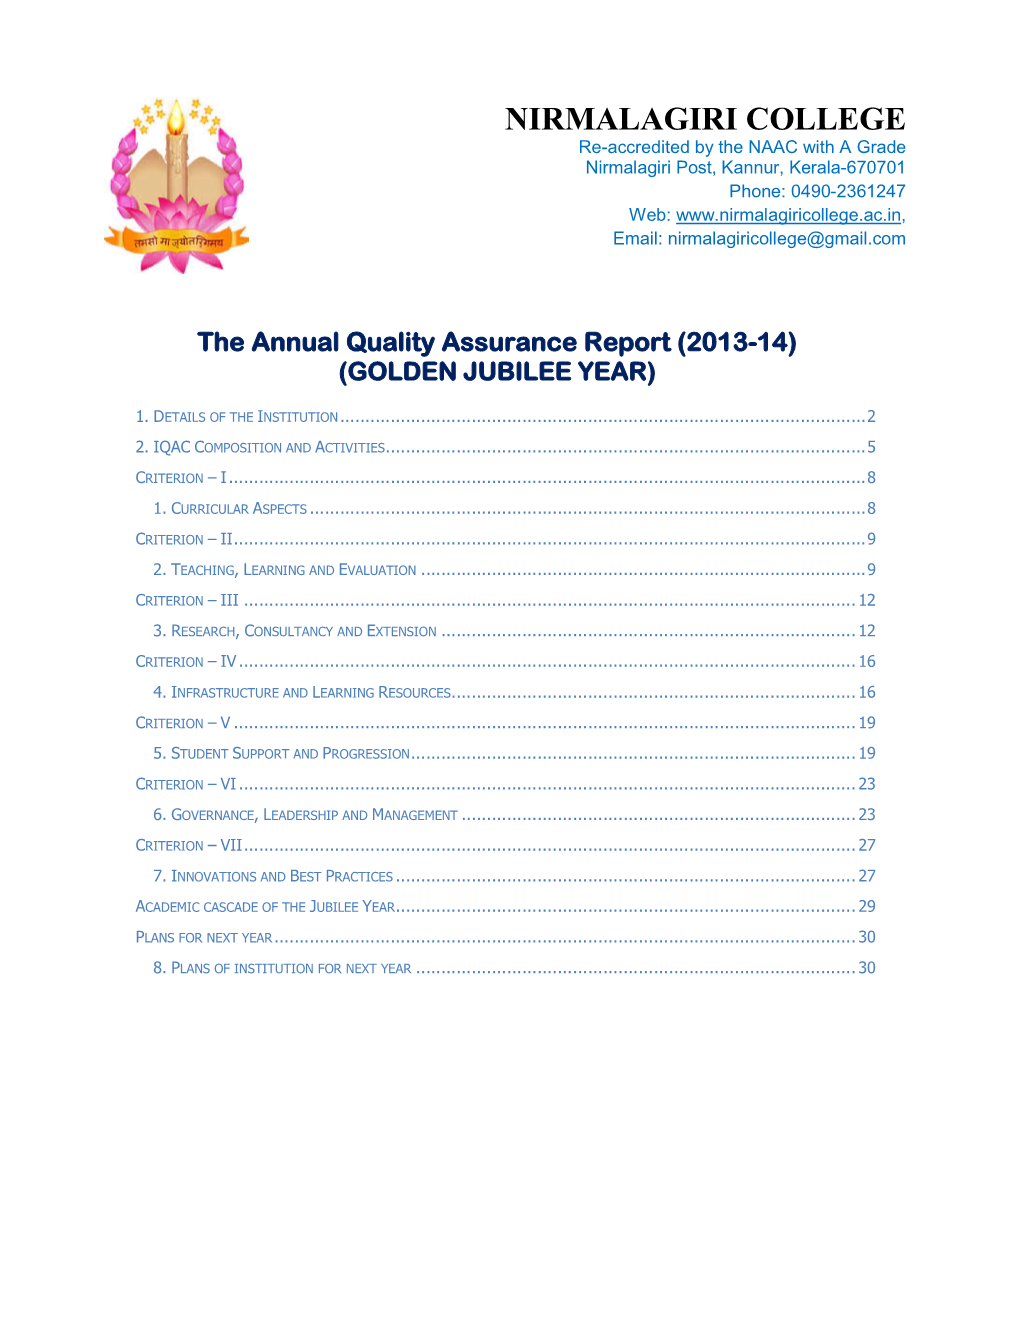 The Annual Quality Assurance Report (2013-14) (GOLDEN JUBILEE YEAR)